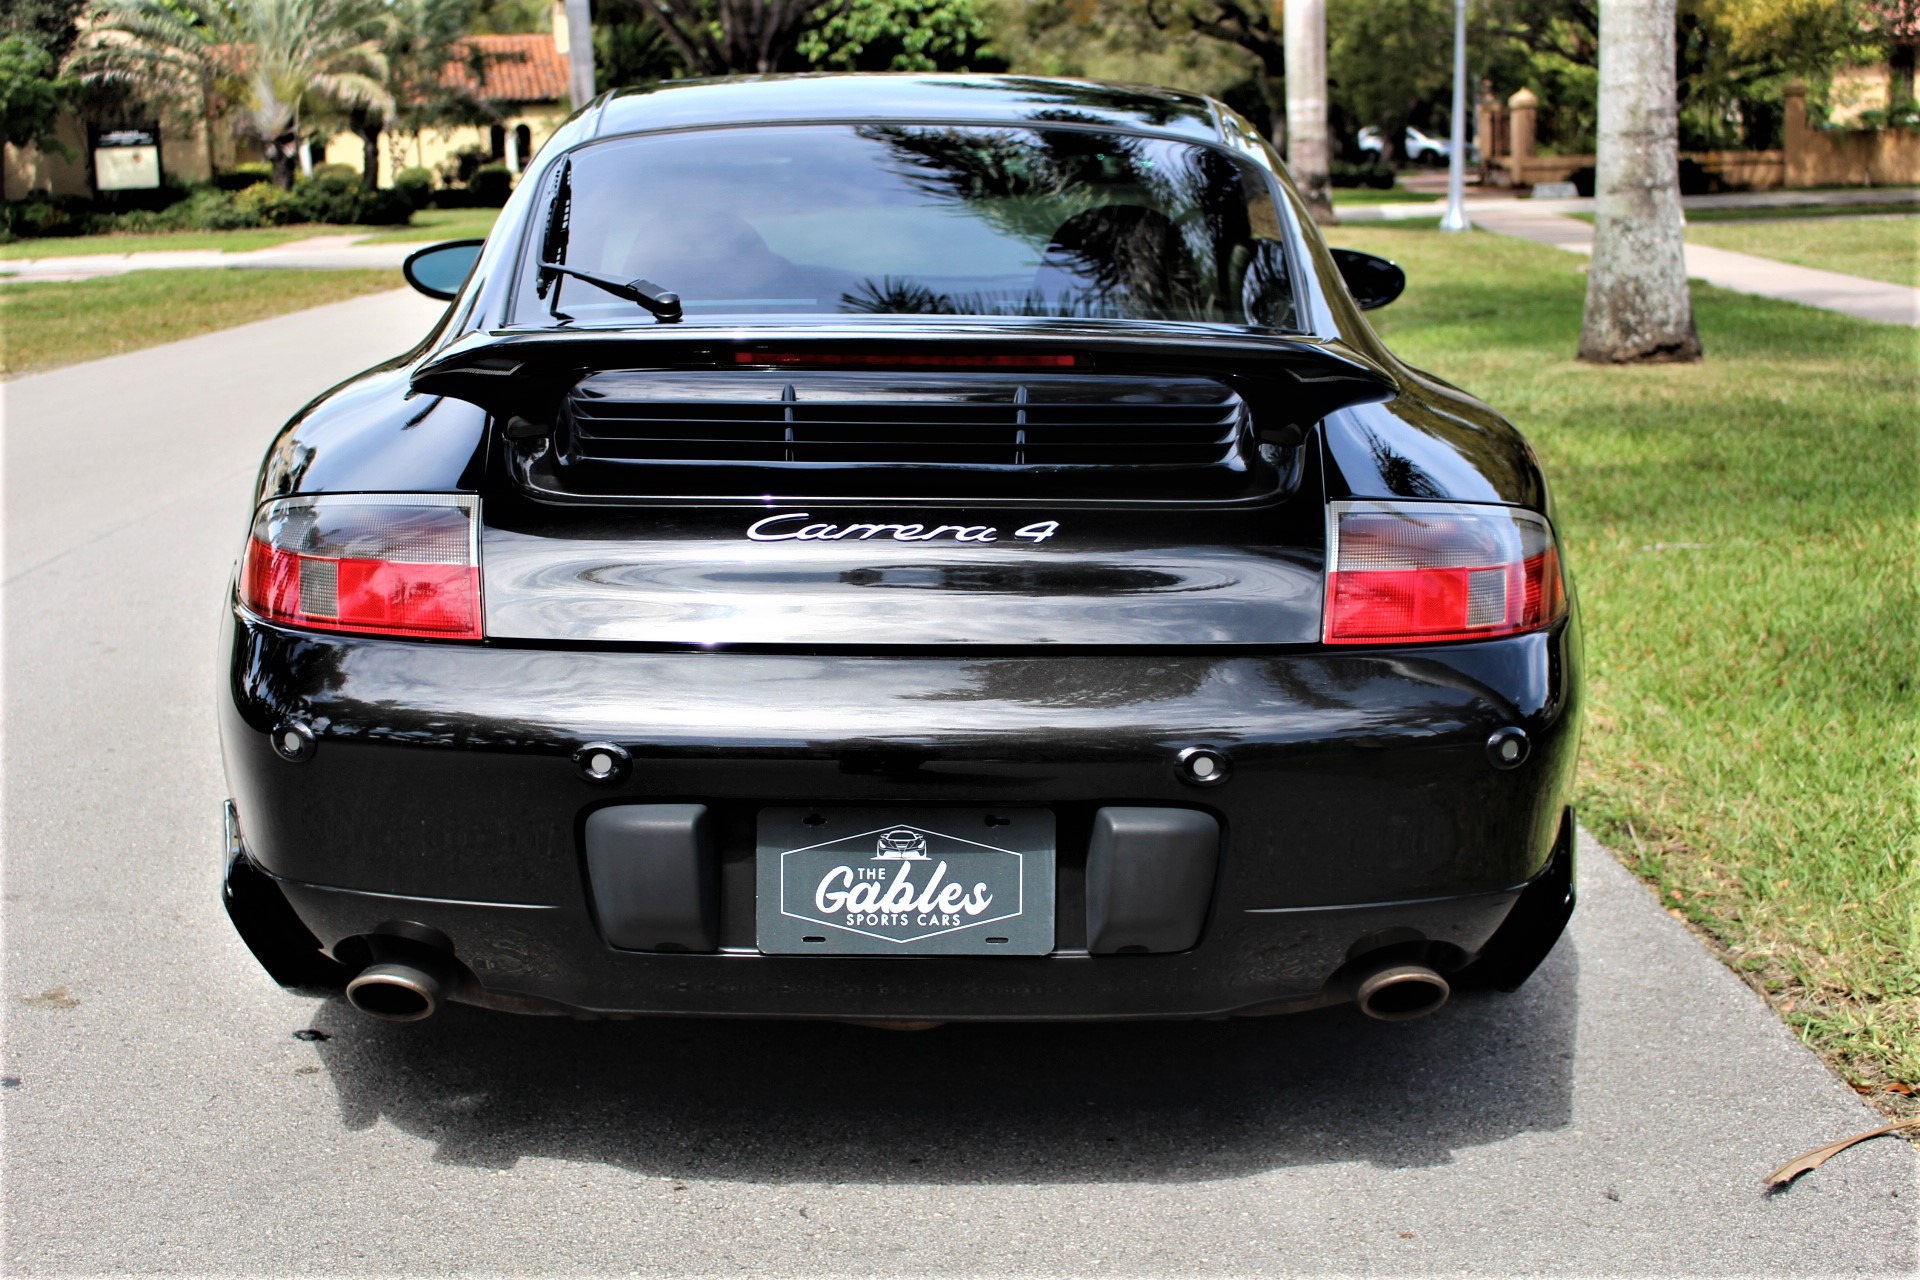 Used 2001 Porsche 911 Carrera 4 for sale Sold at The Gables Sports Cars in Miami FL 33146 4